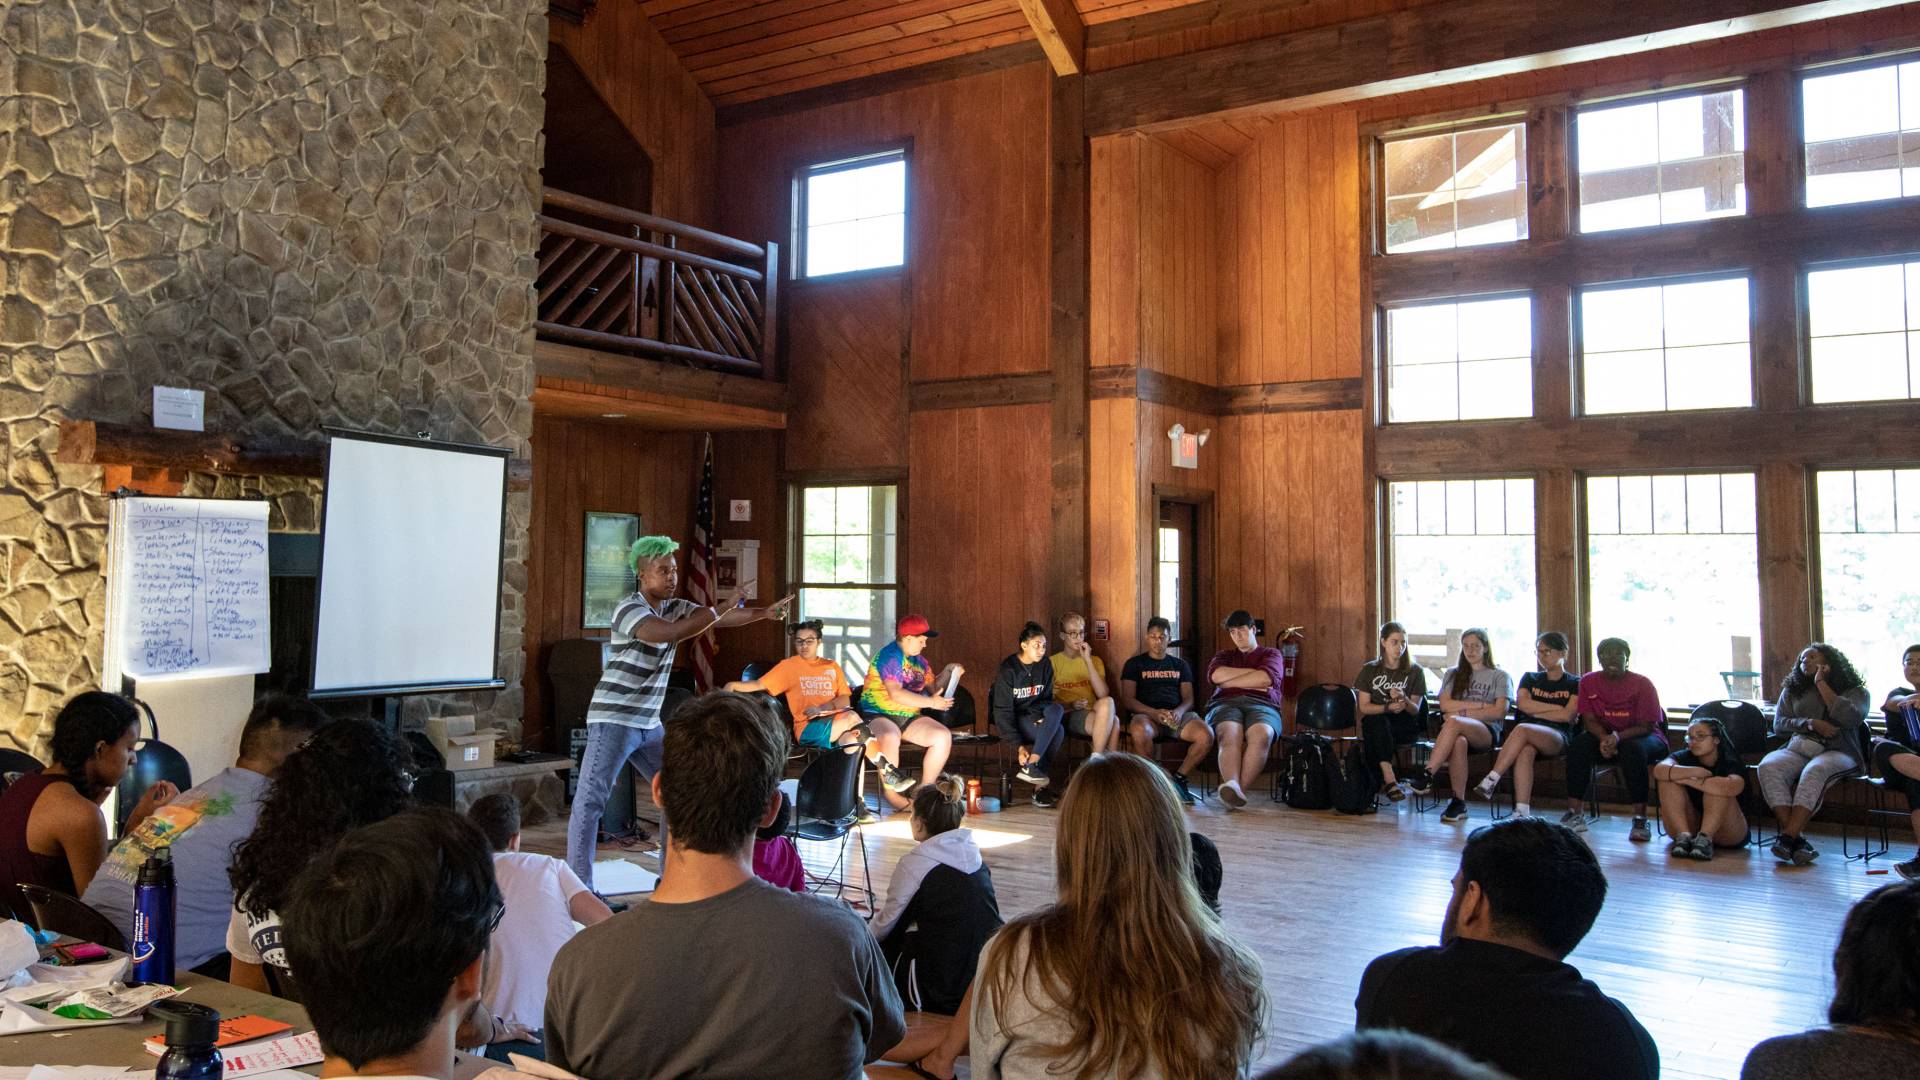 Students participating in Dialogue and Difference in Action workshop in YMCA lodge